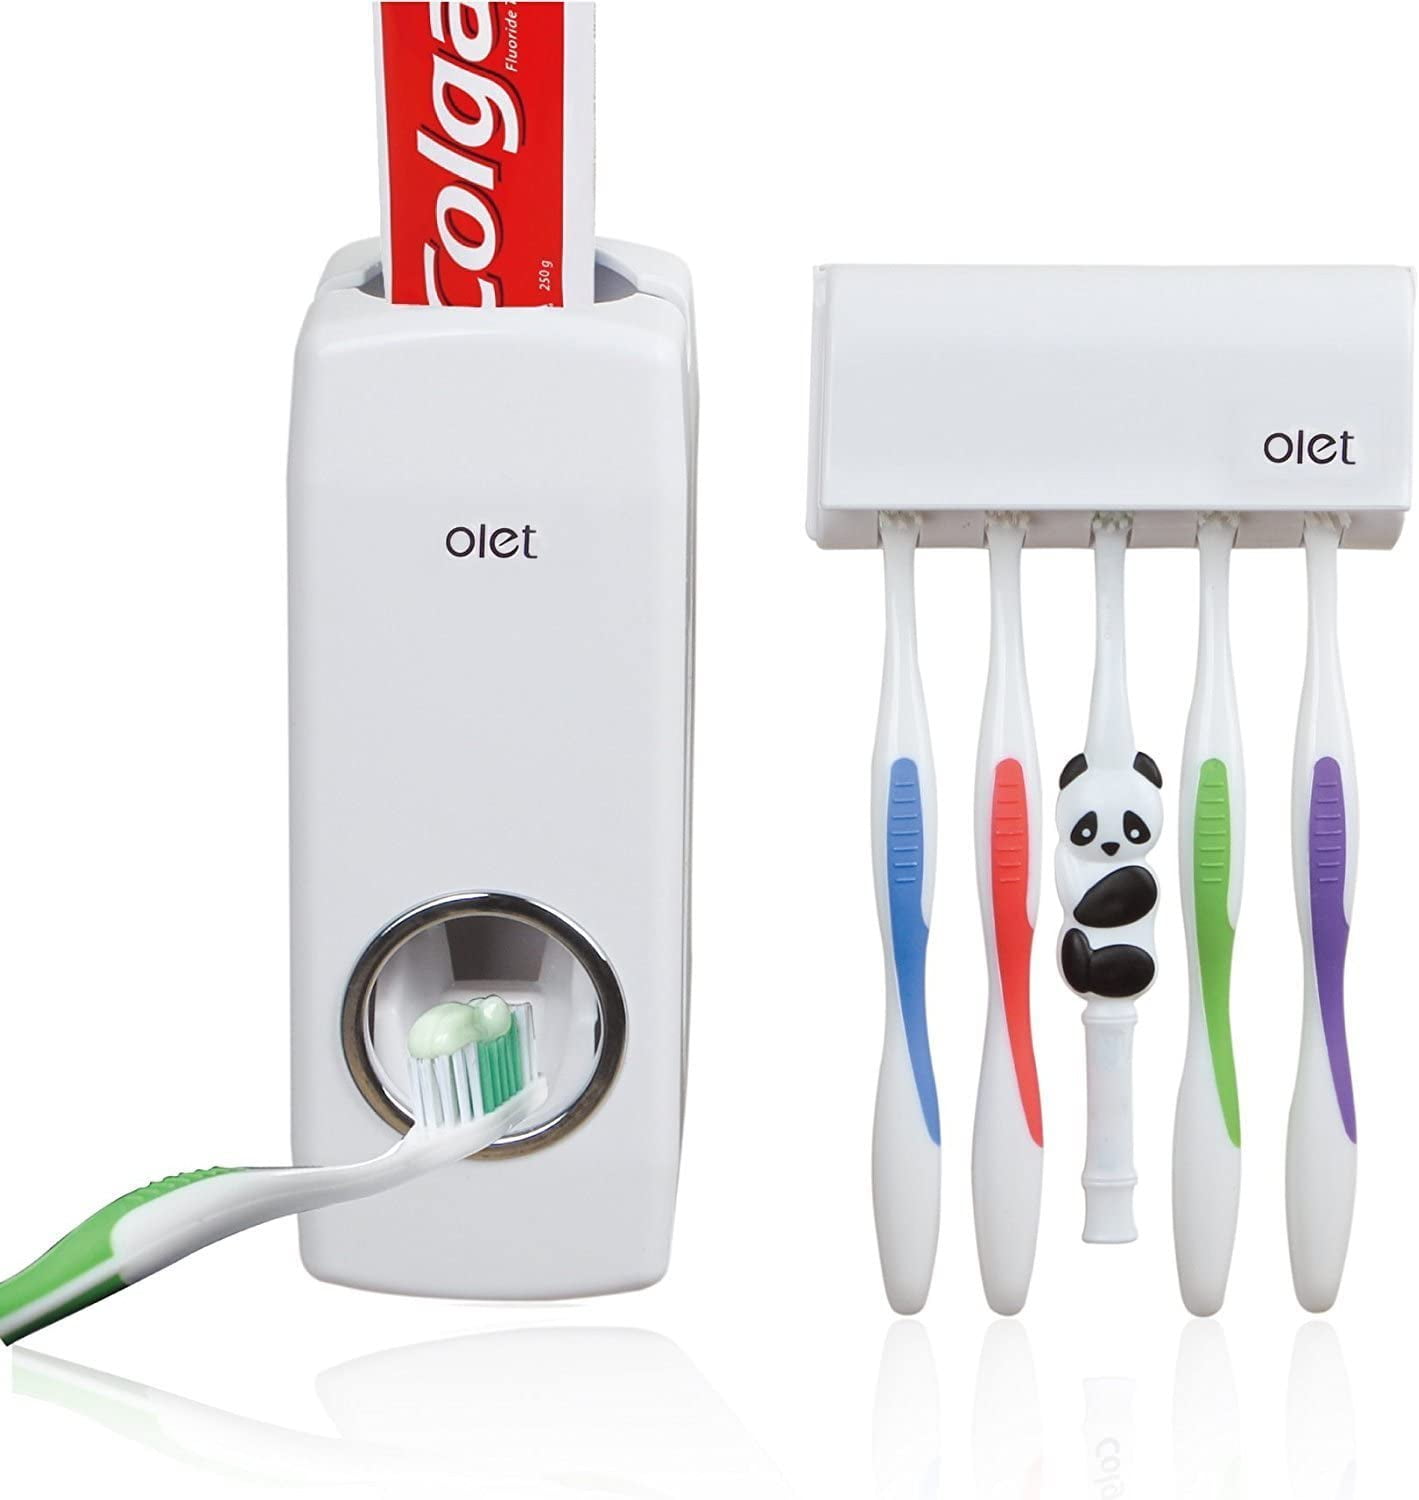 5 Toothbrush Holder Set Wall Mount Stand US Auto Automatic Toothpaste Dispenser 